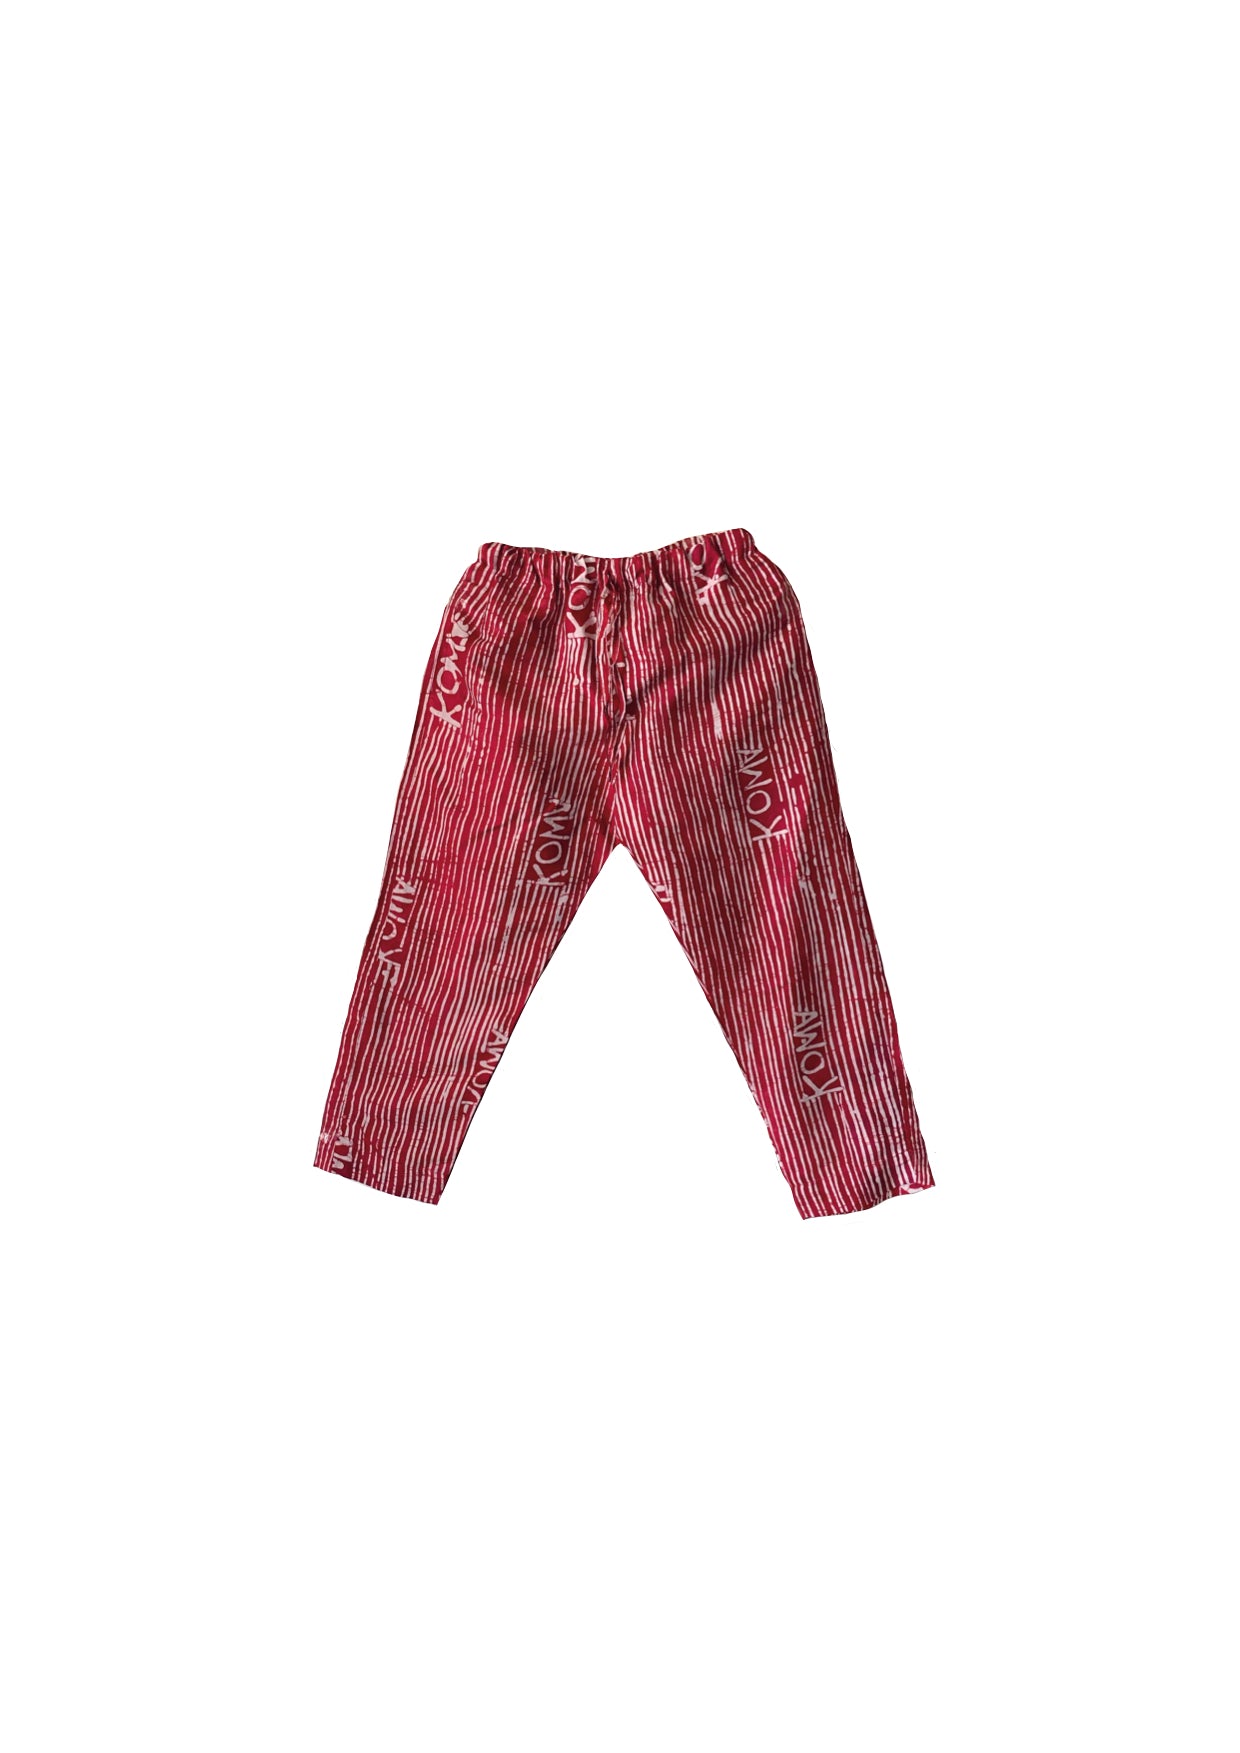 Trousers- red and white